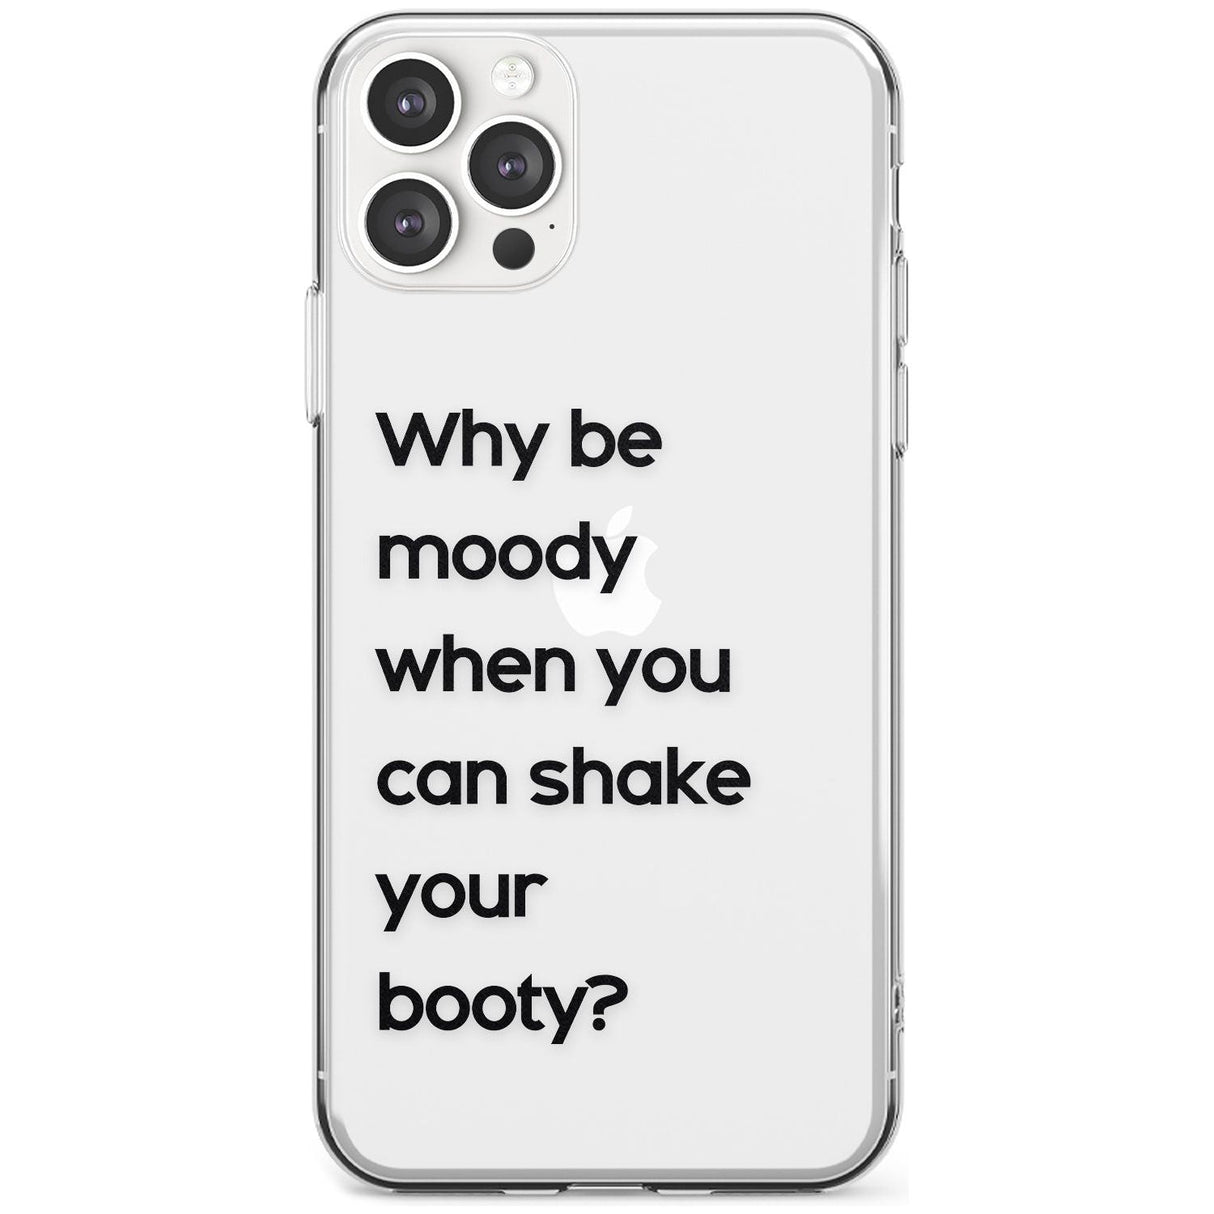 Why be moody? Black Impact Phone Case for iPhone 11 Pro Max